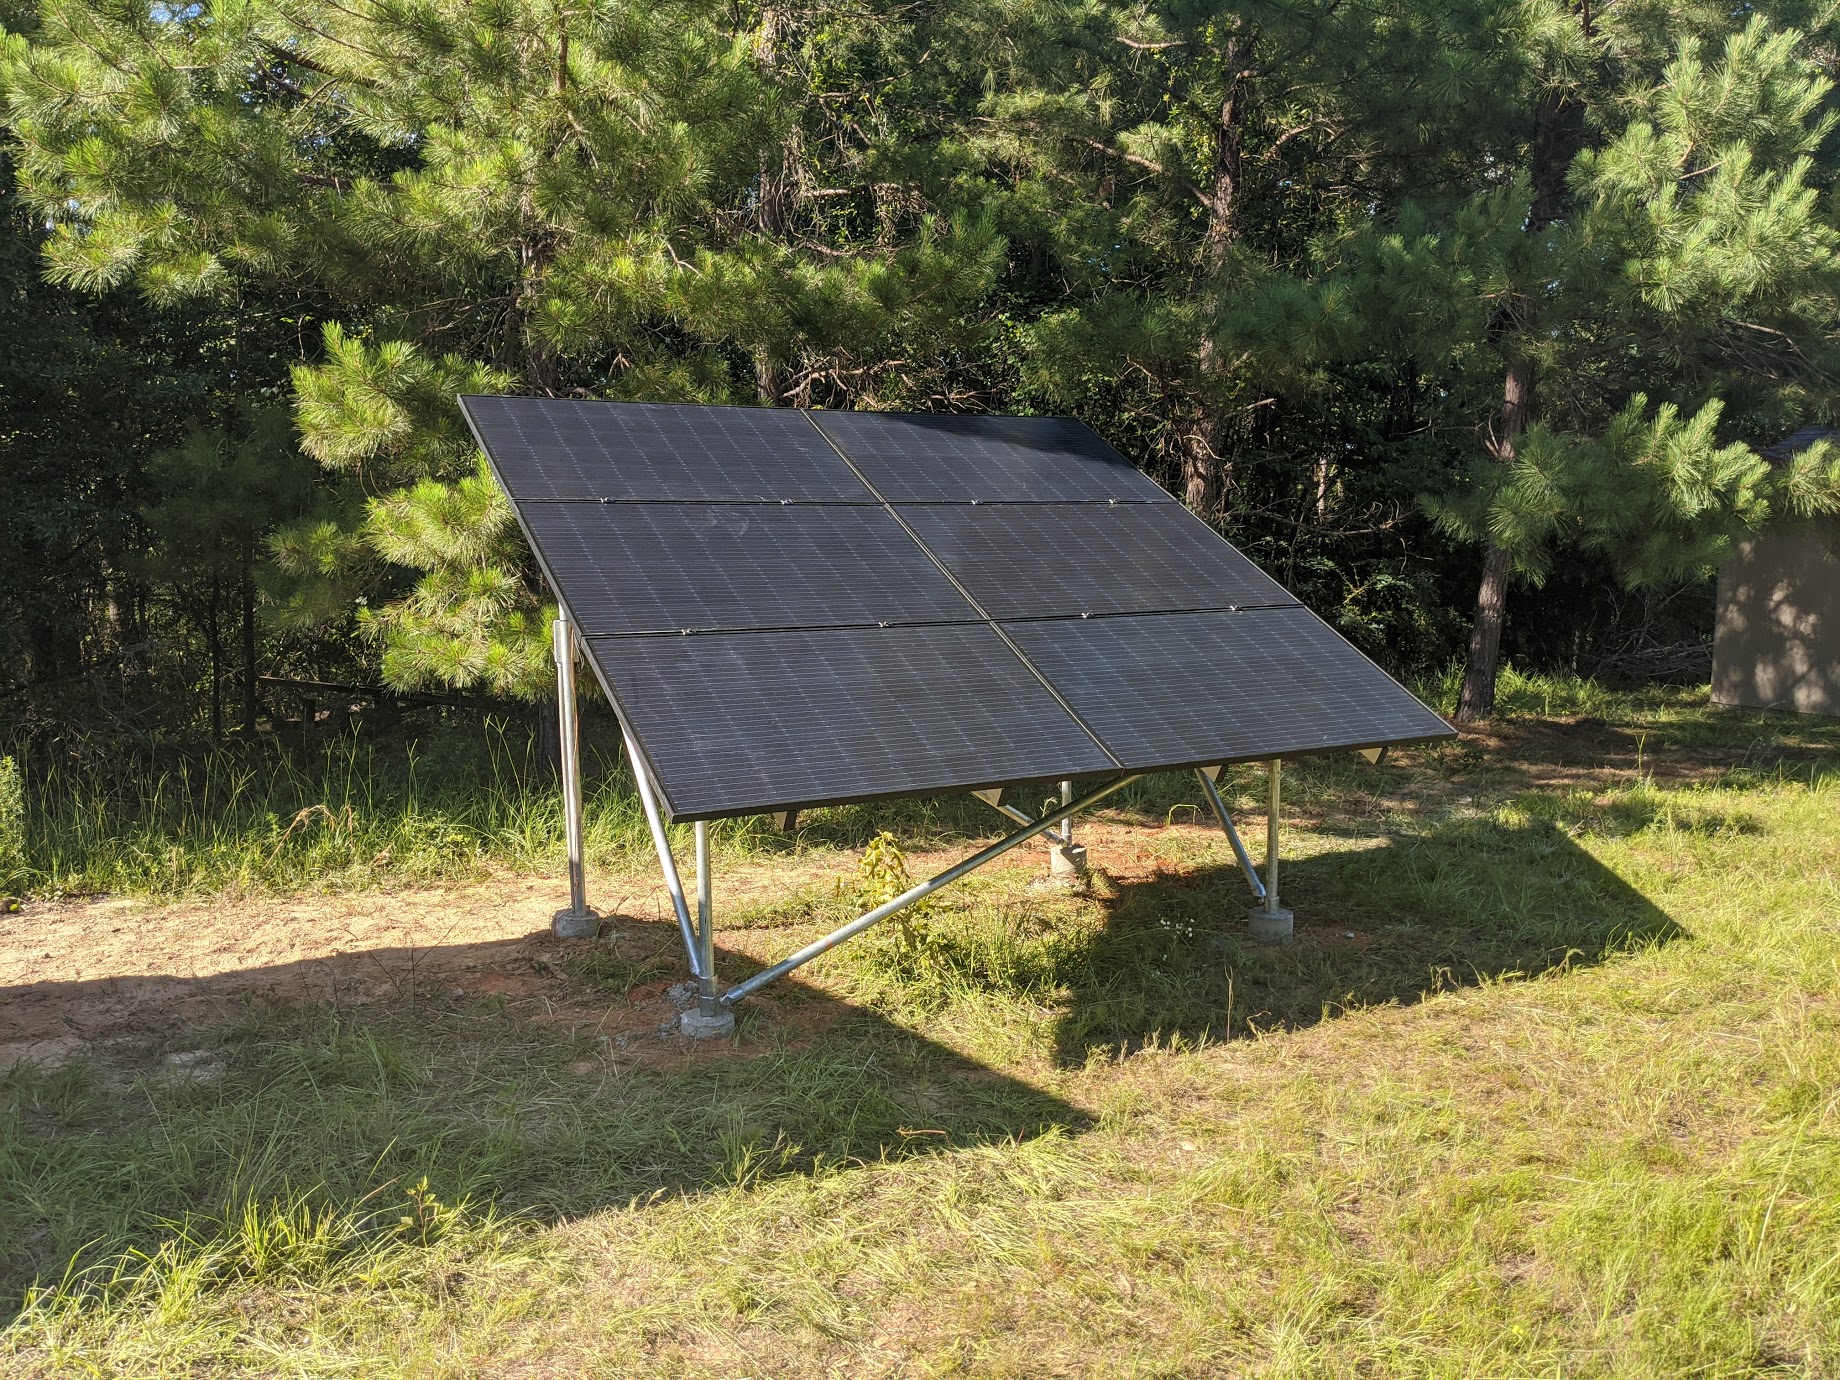 Small ground mount array for off-grid hunting cabin